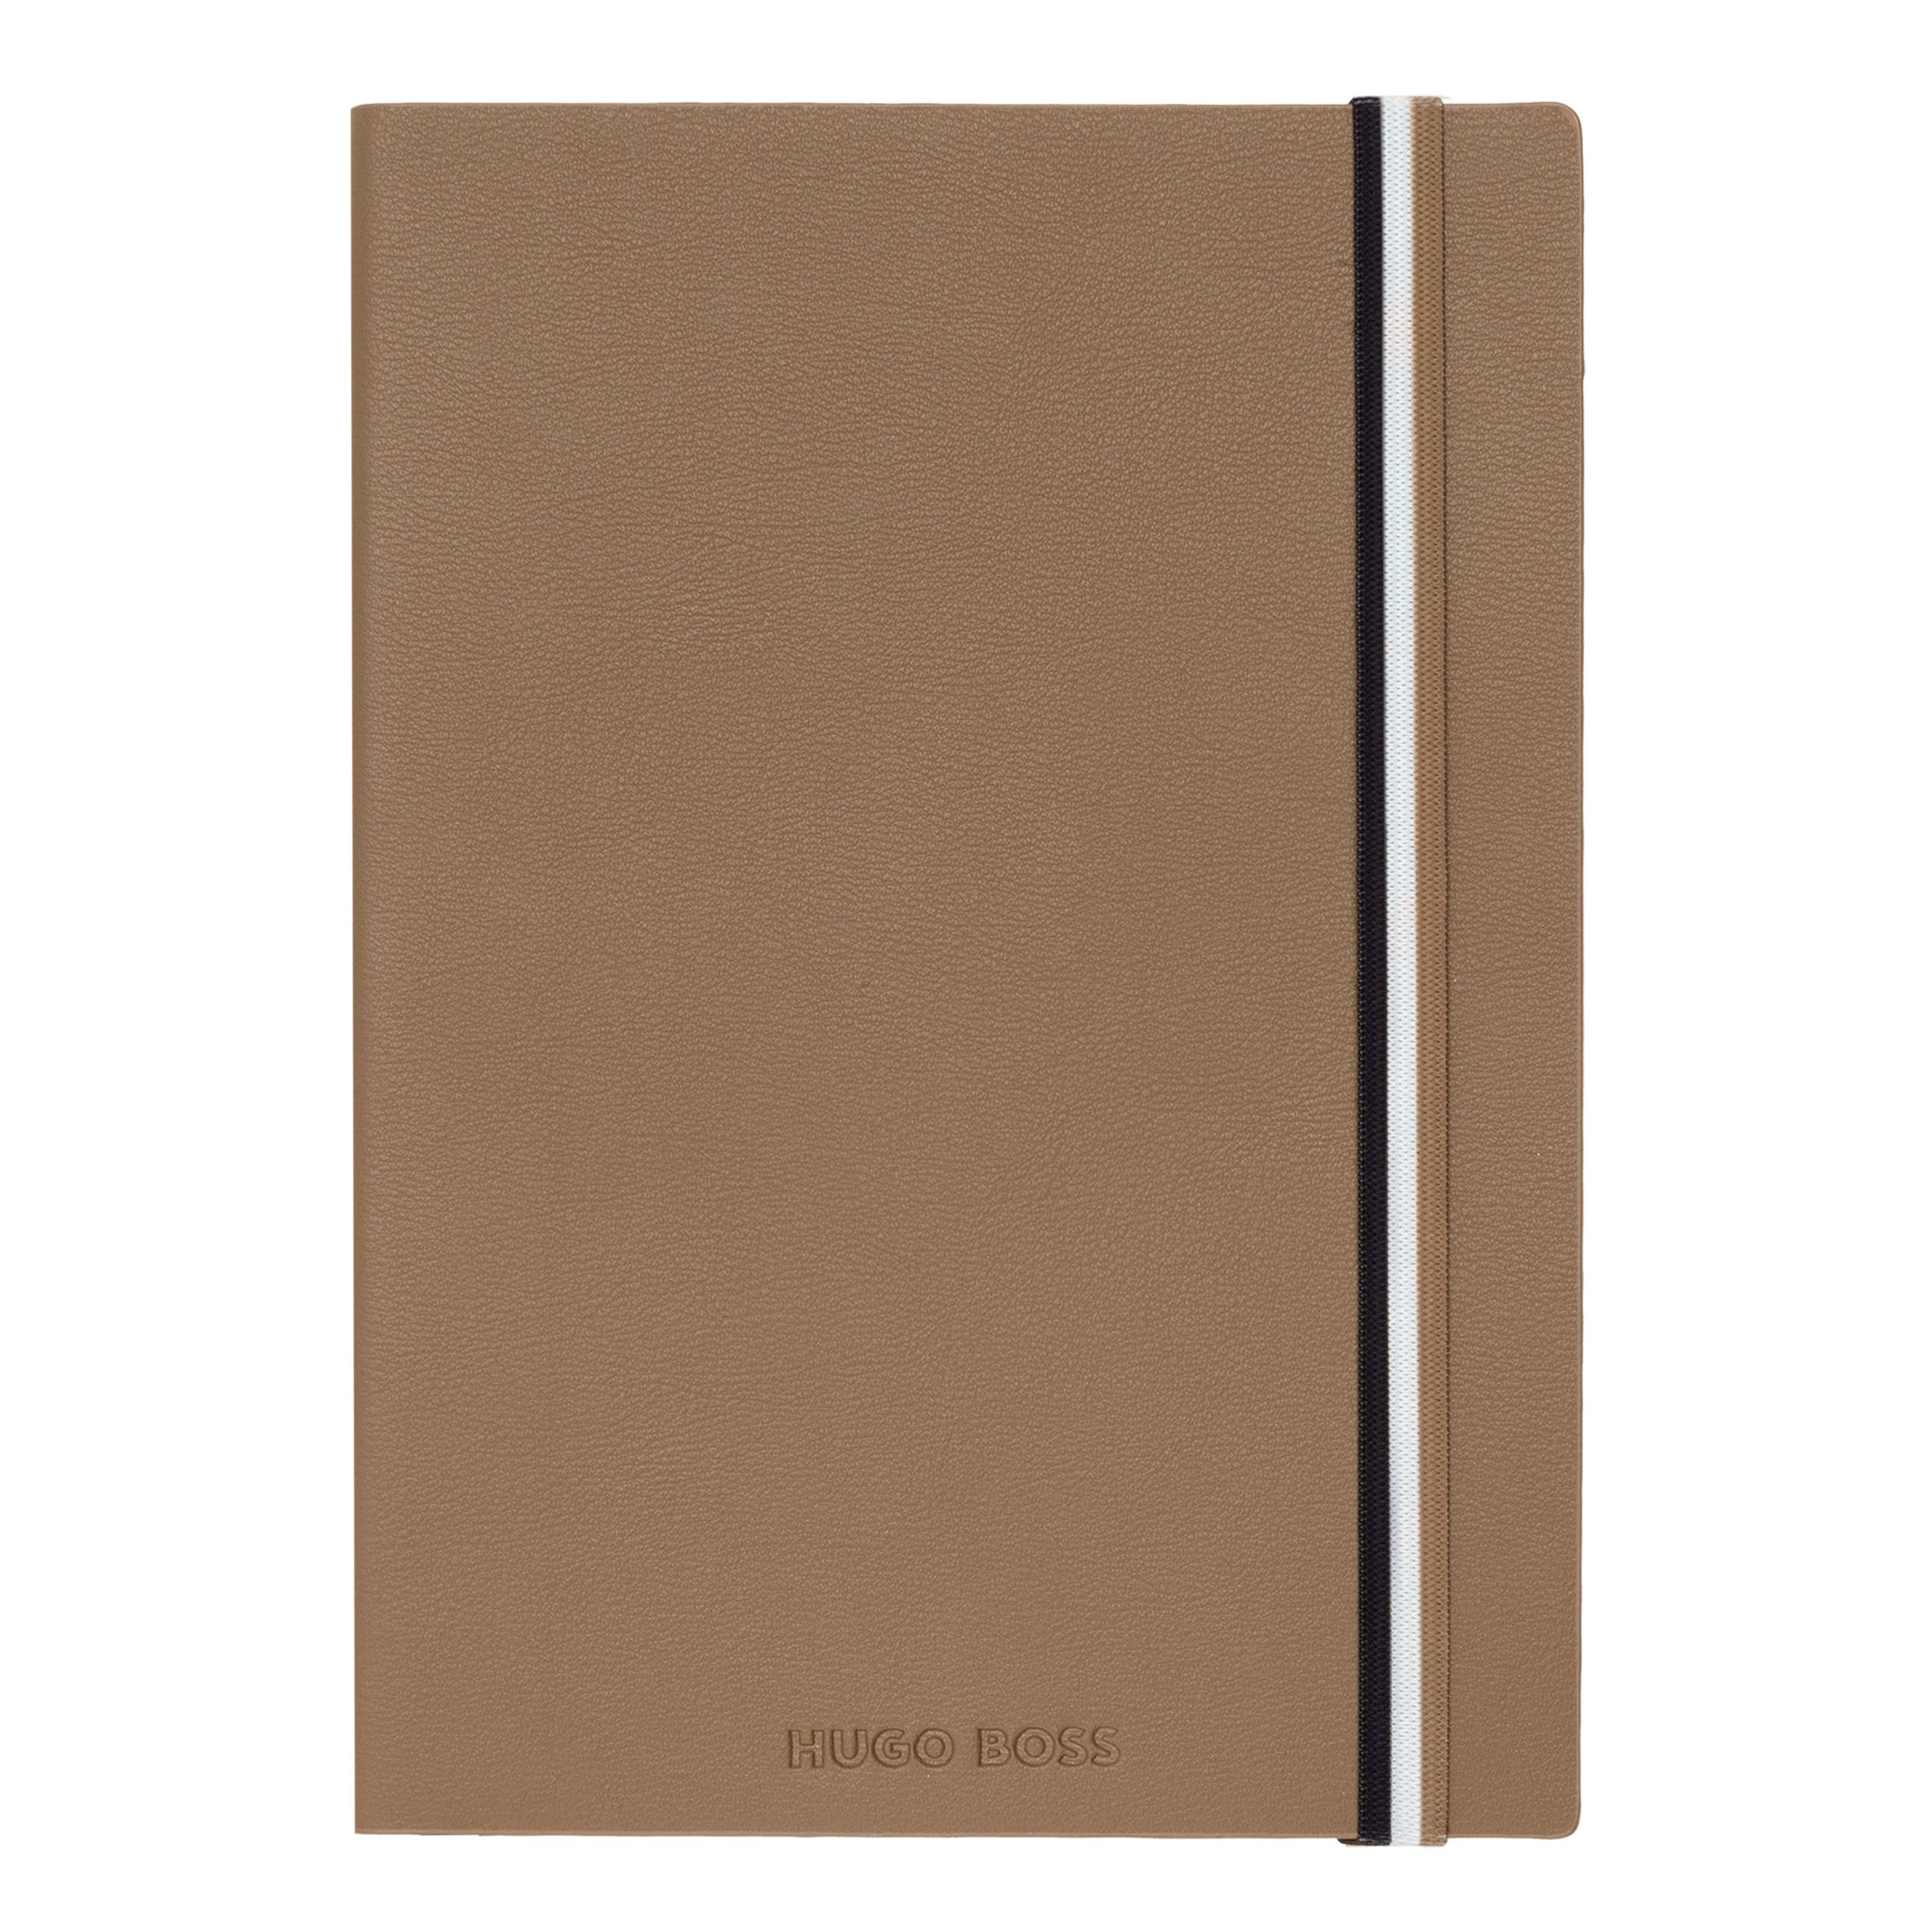 Hugo Boss Notebook A5 Iconic Camel Lined